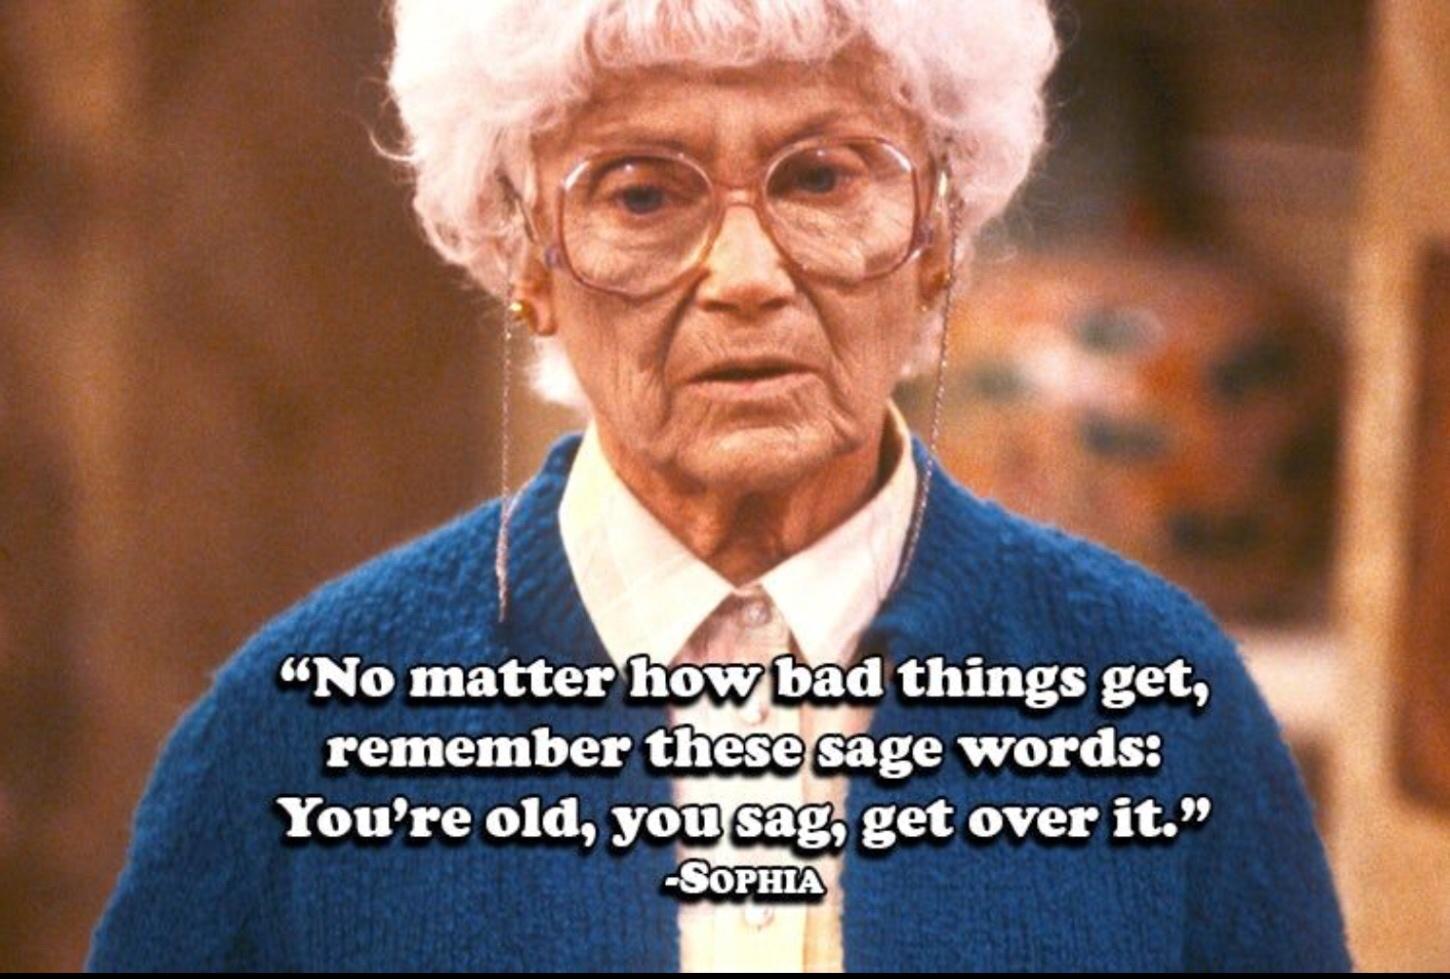 estelle getty - No matter how bad things get, remember these sage words You're old, you sag, get over it. Sophia